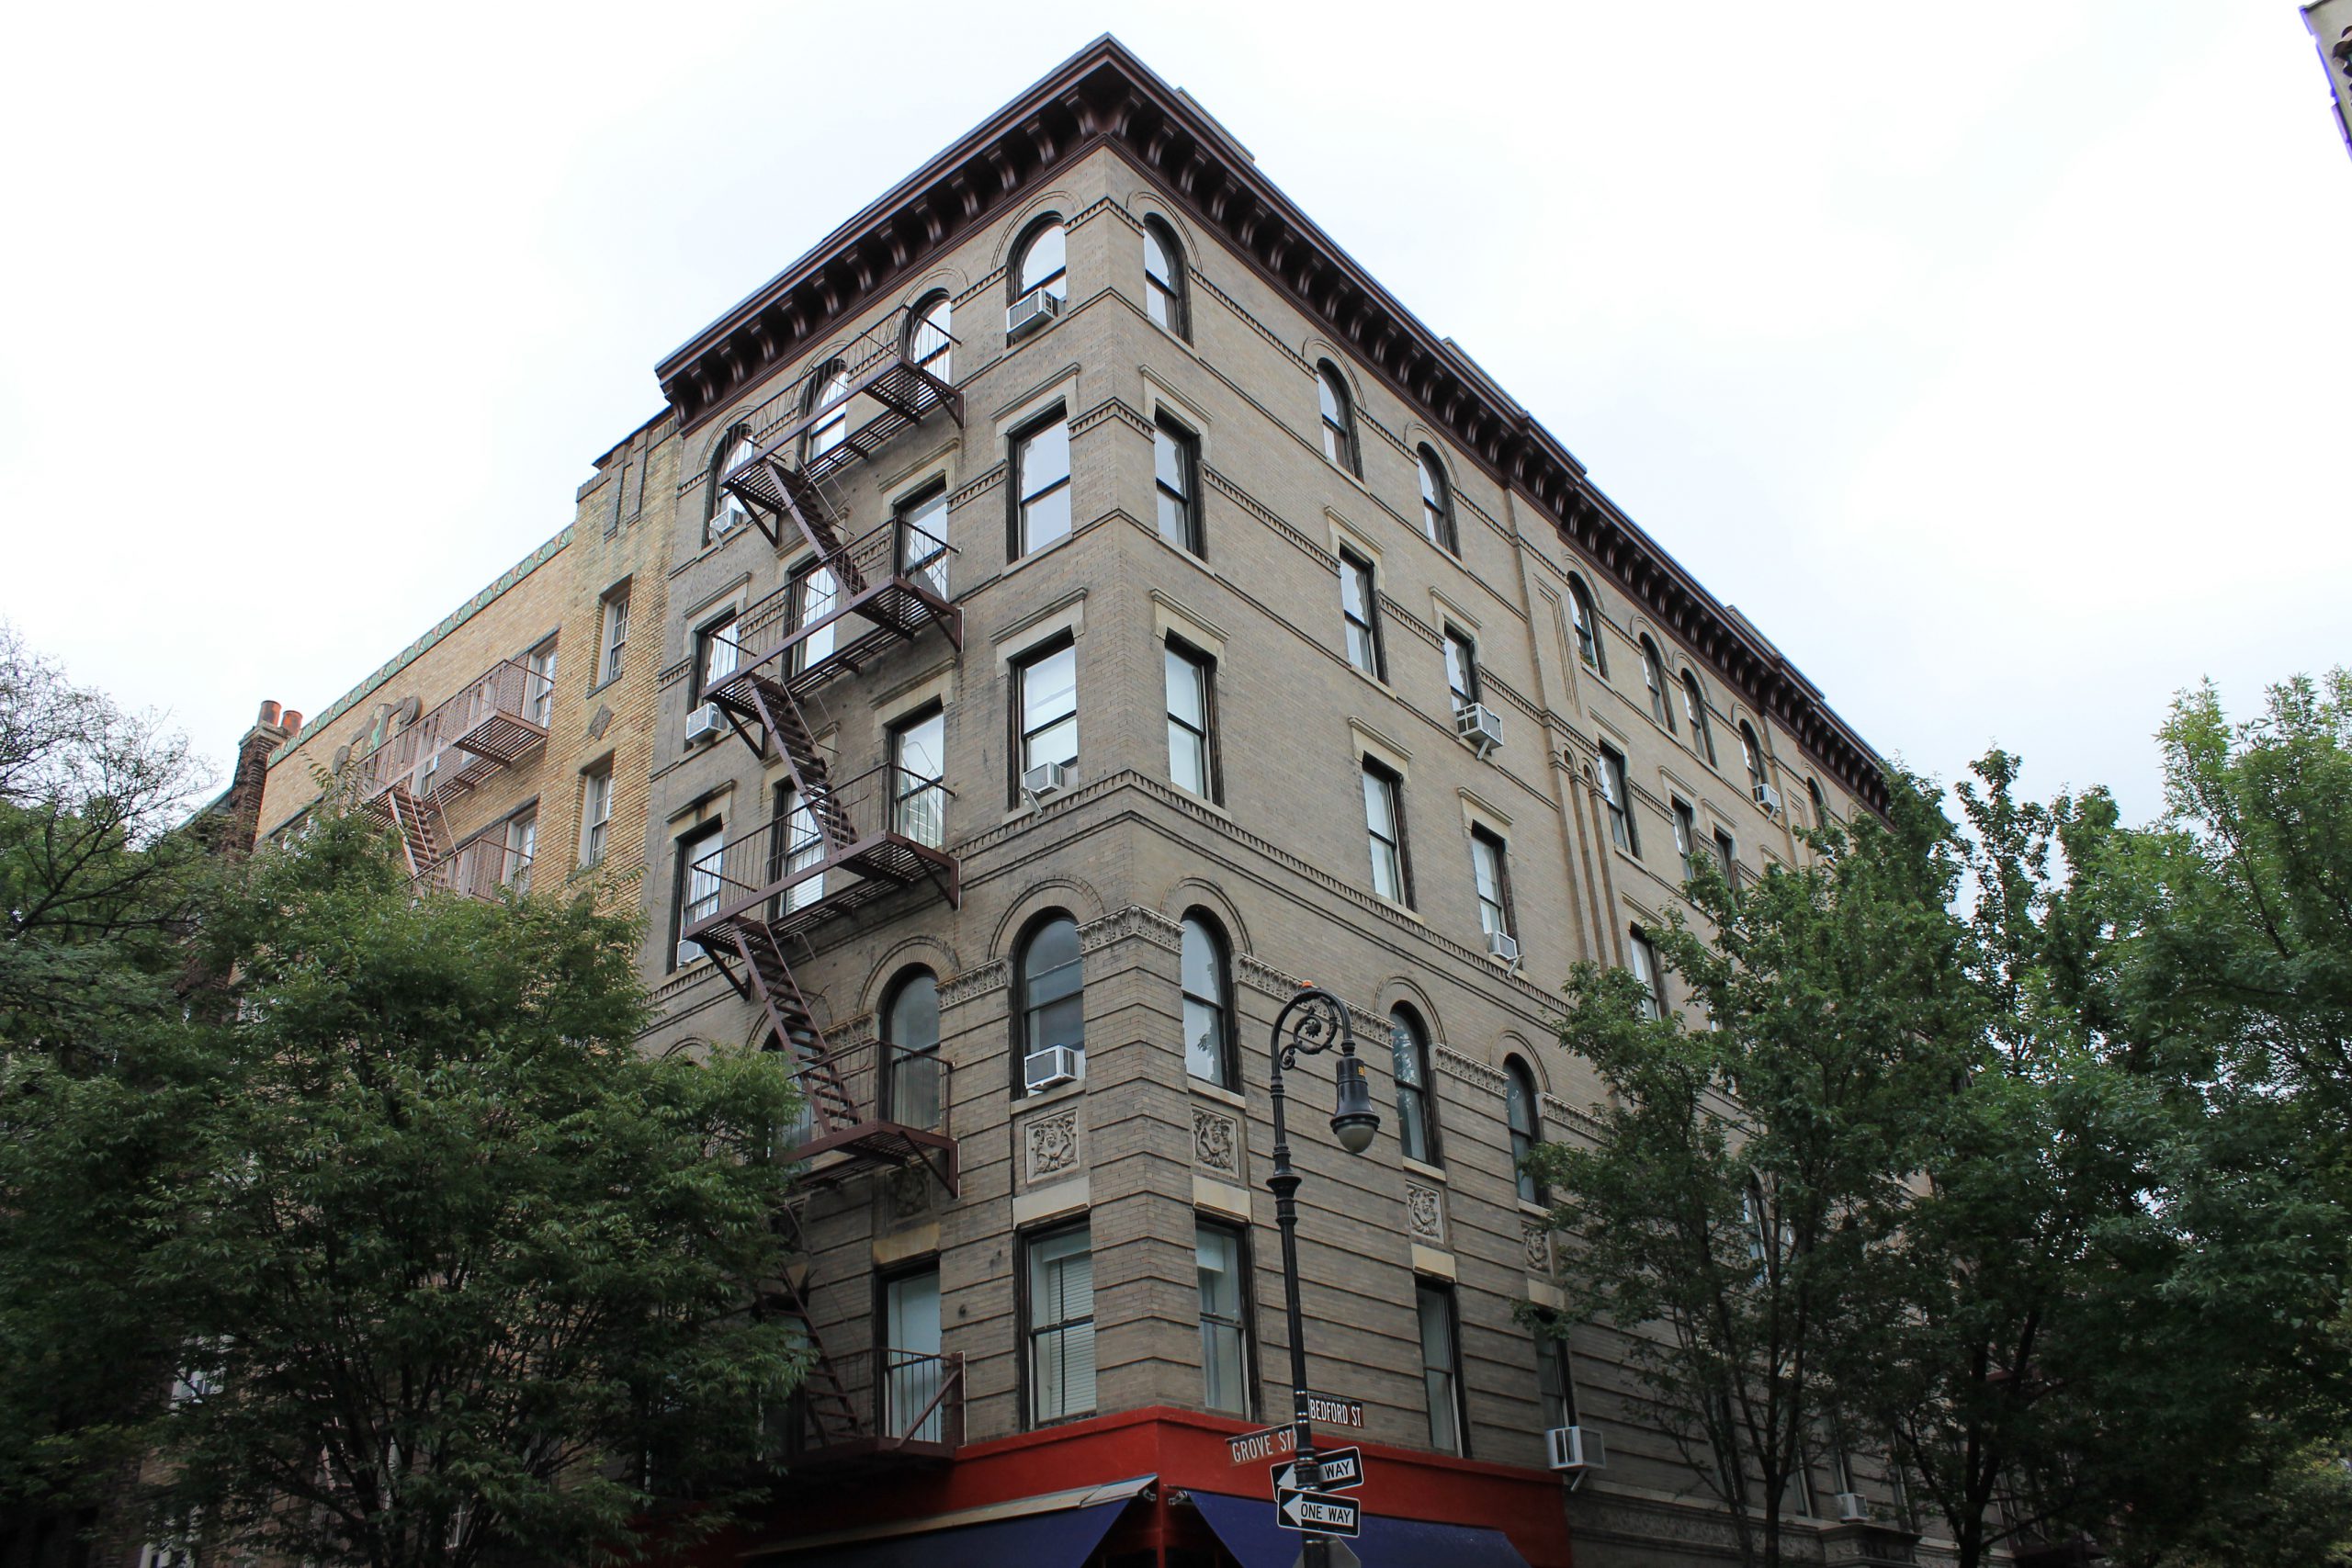 Friends' in NYC: How plausible were the Greenwich Village apartments  depicted in the hit '90s series?